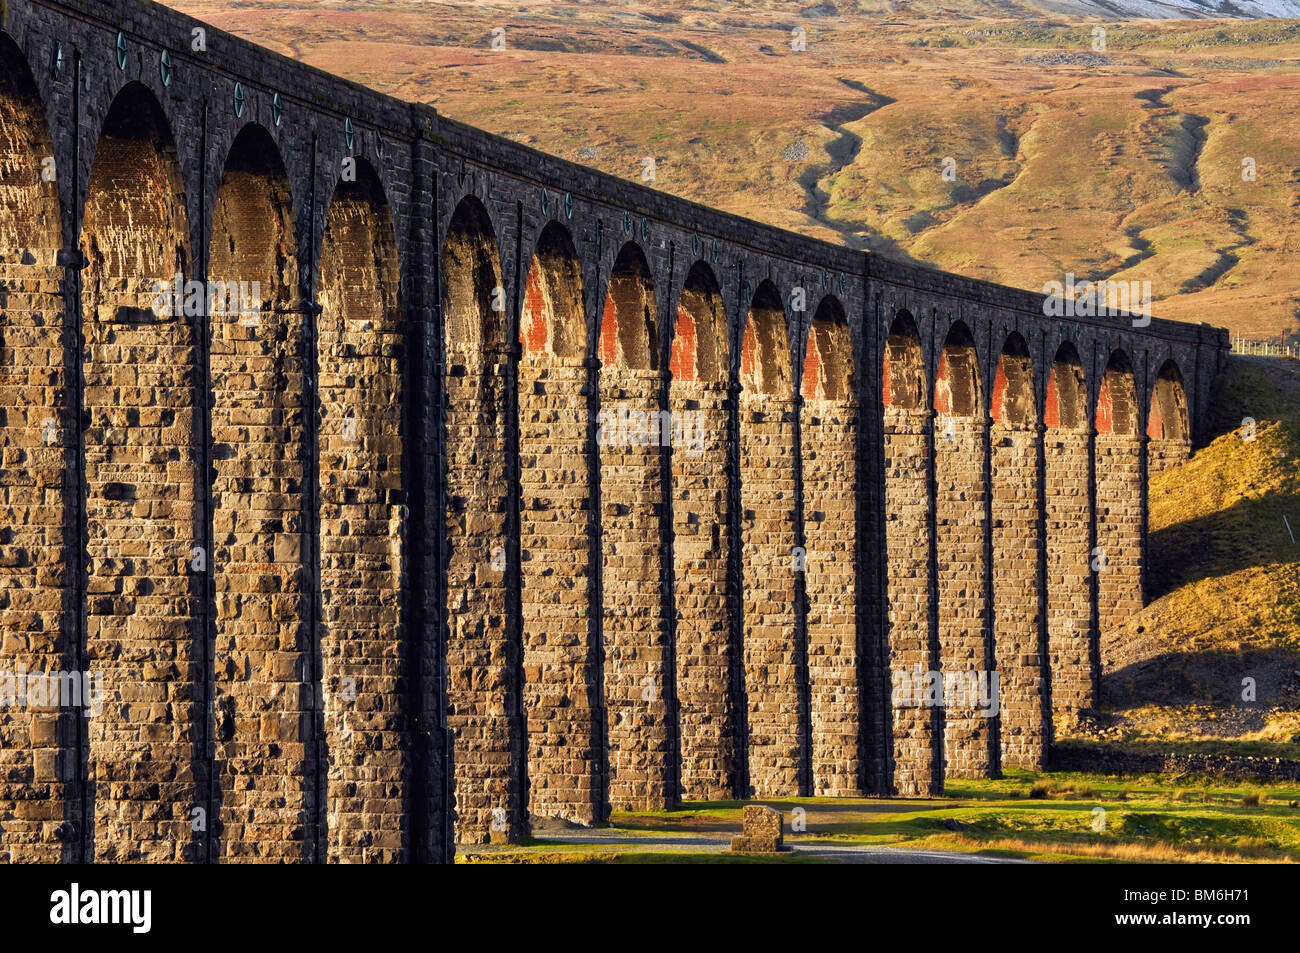 The Ribblehead Viaduct on the Settle-Carlisle railway line in the Yorkshire Dales National Park, England Stock Photo